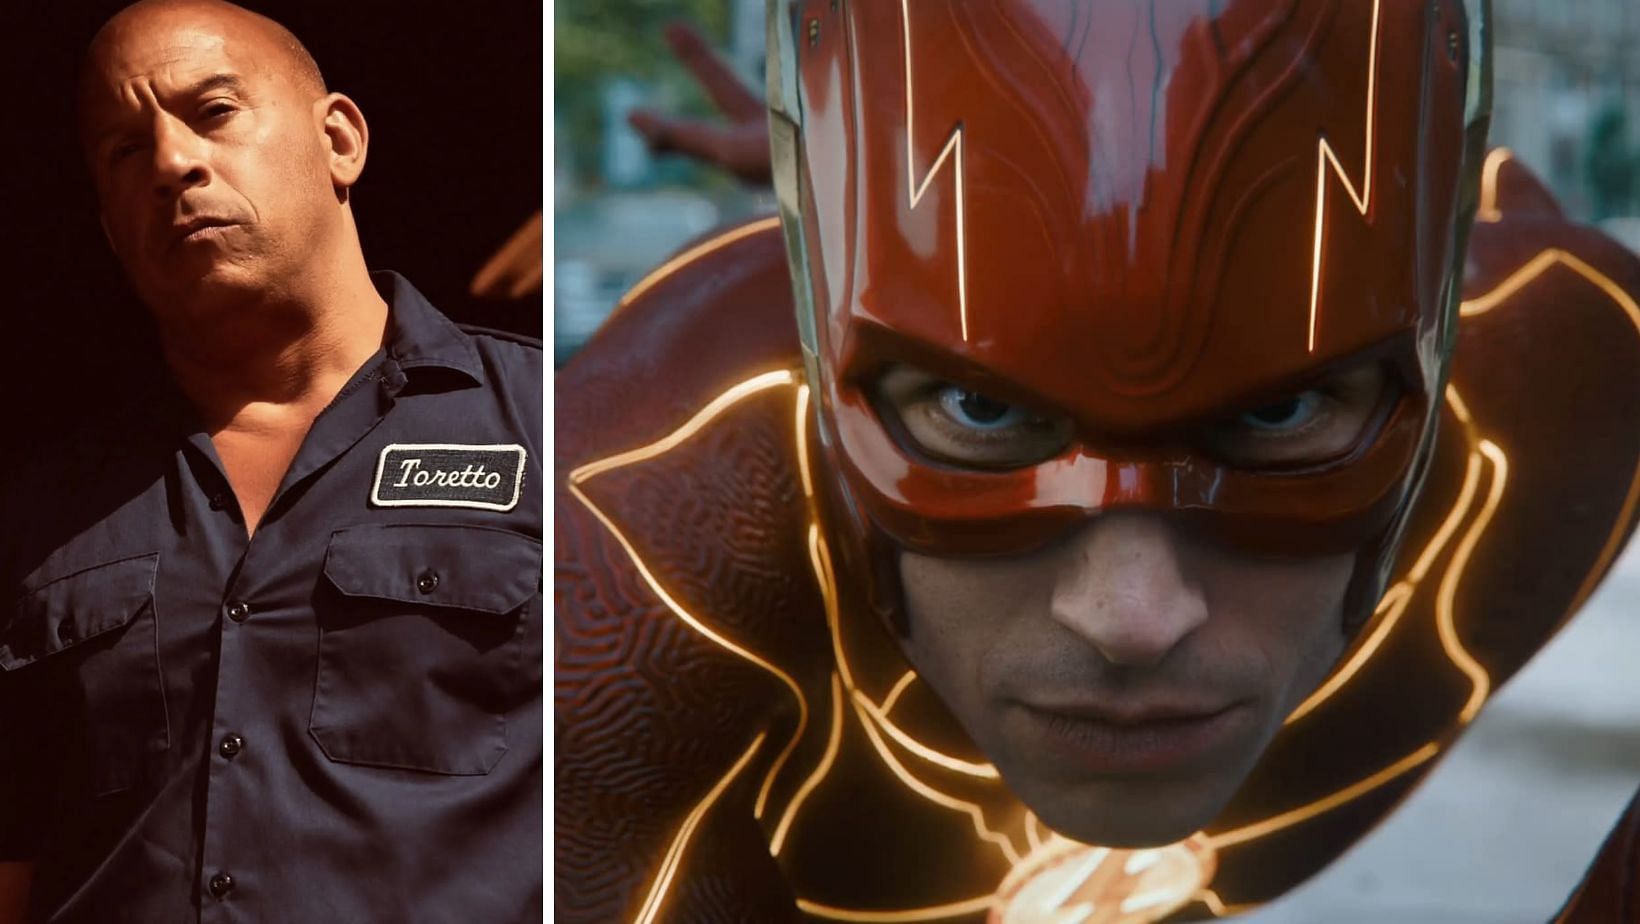 The Flash and Fast X: Action-Packed Trailers Debut During Super Bowl 2023 (Image via Sportskeeda)